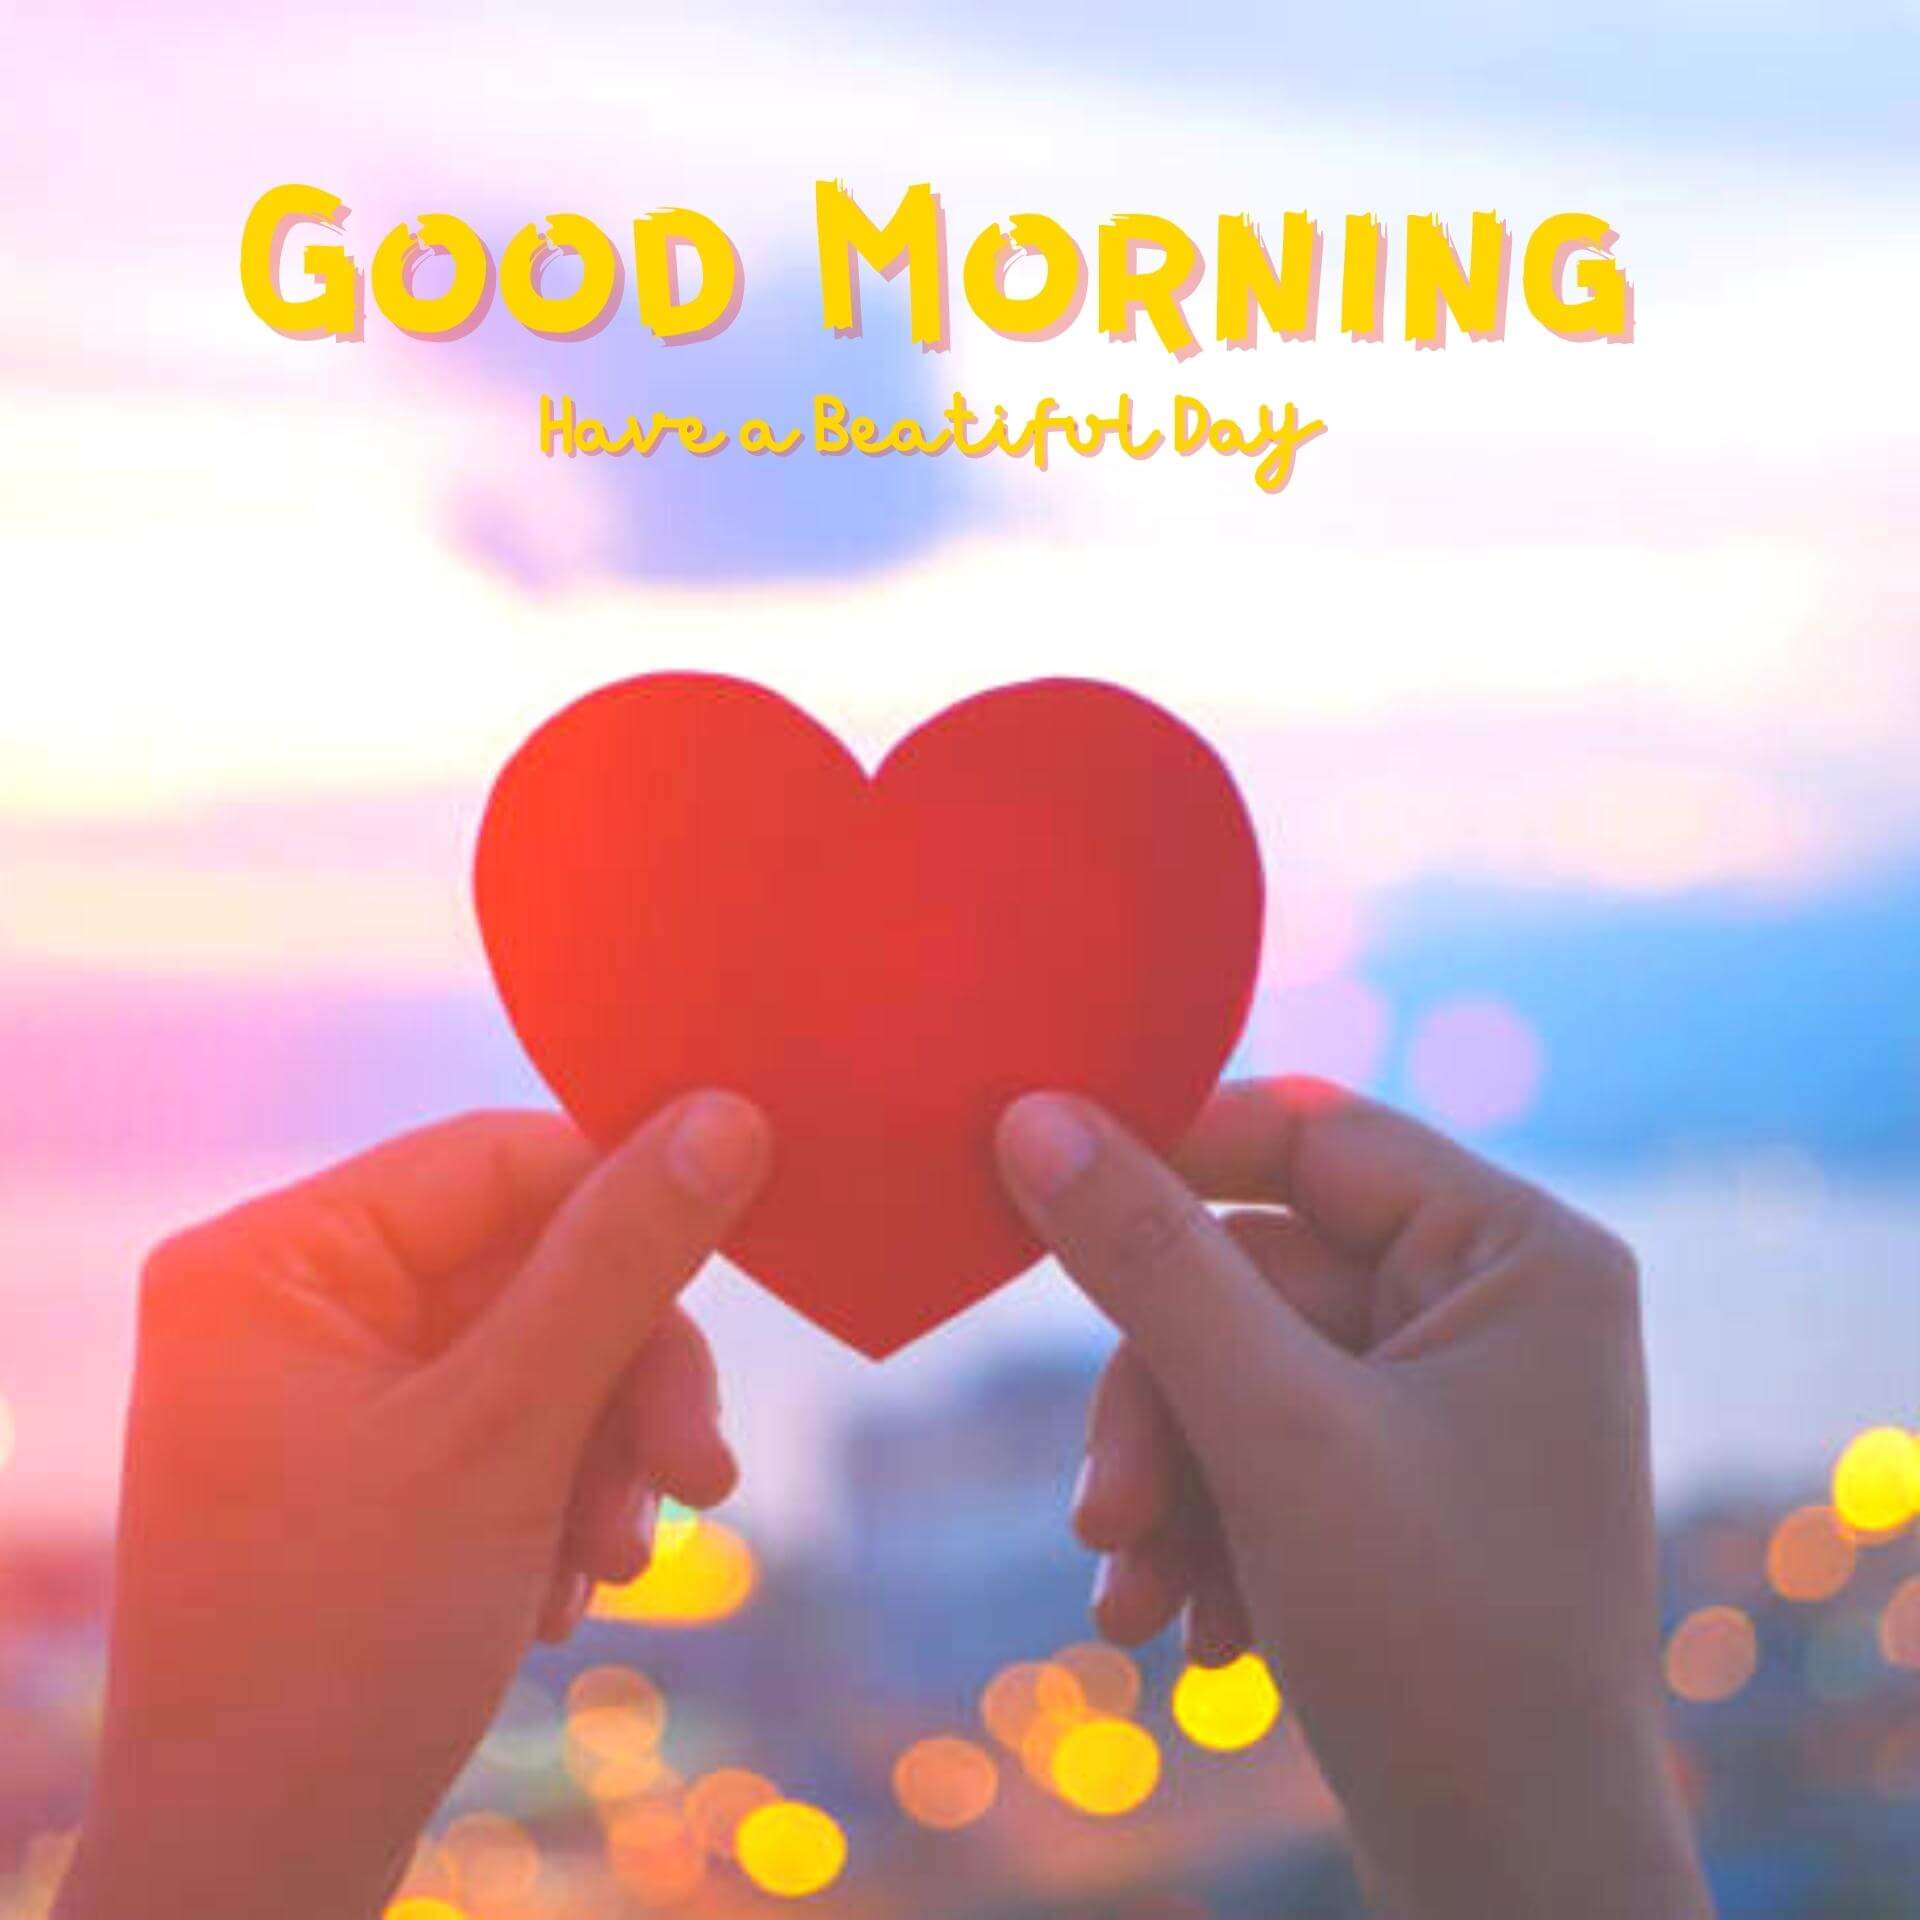 download the images of good morning